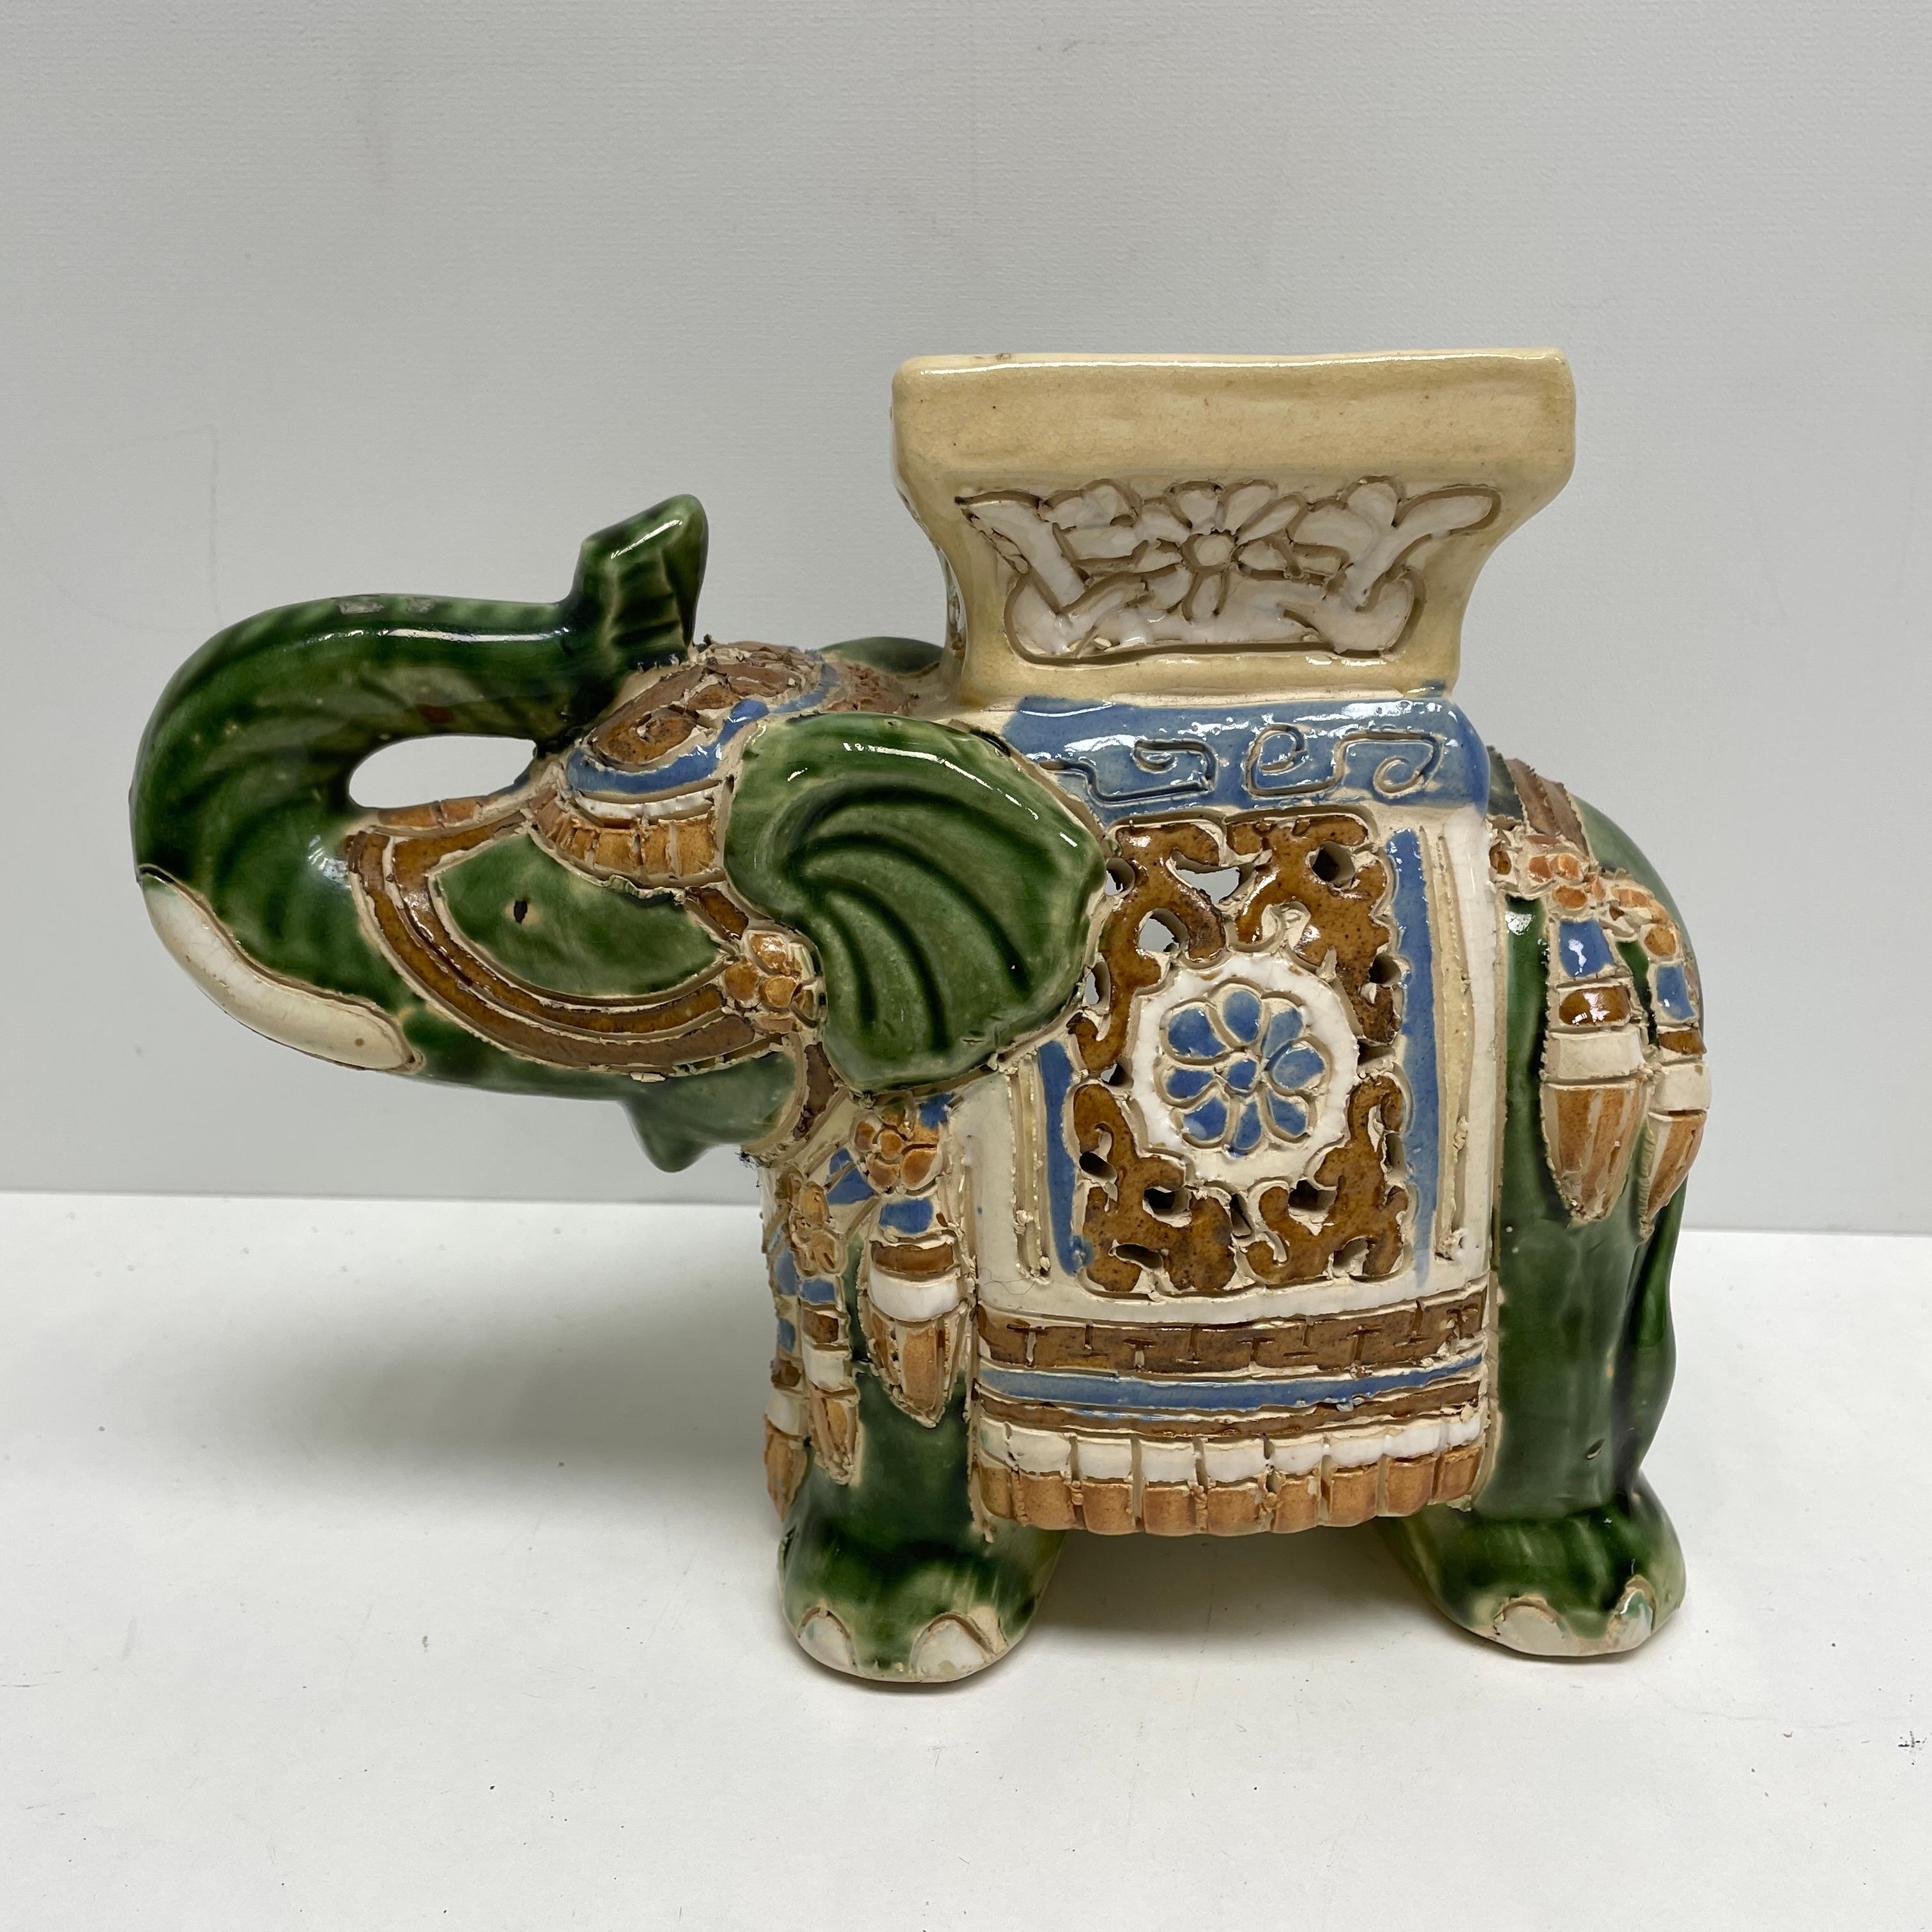 Petite mid-20th century glazed ceramic elephant candle Fragrance lamp for Oil. Handmade of ceramic. Nice addition to your home, patio or garden.
         